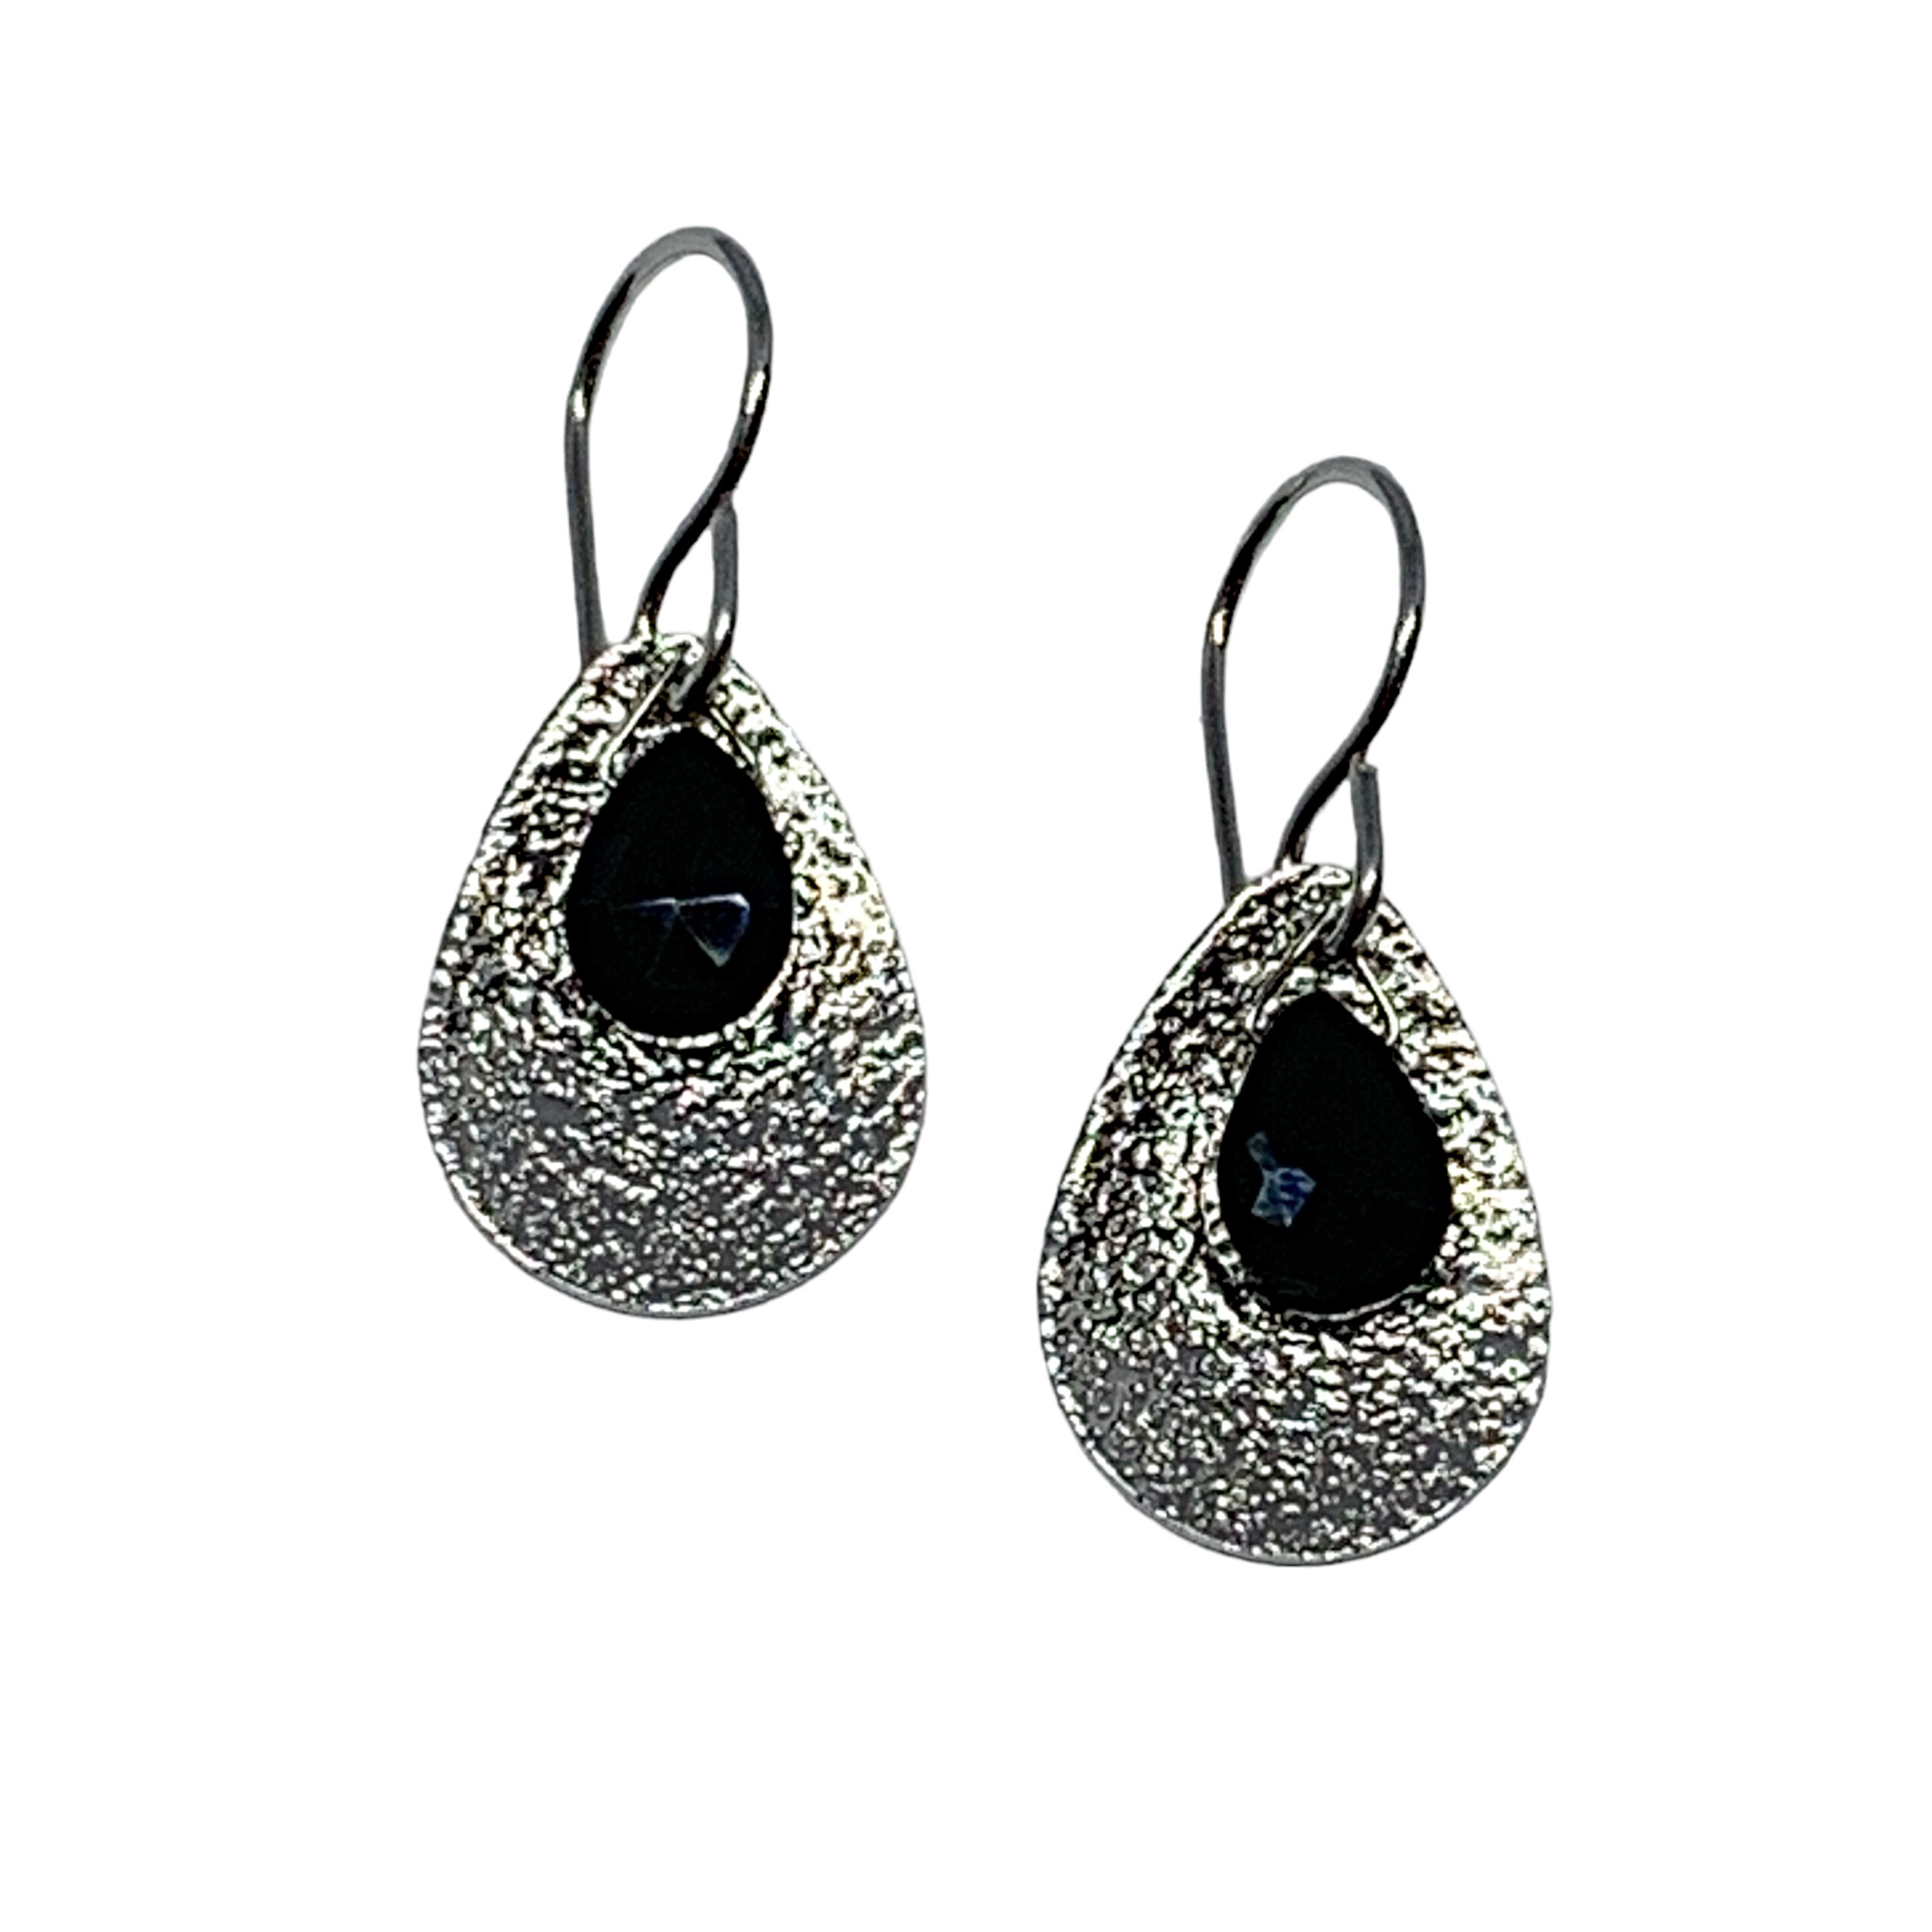 Handmade silver and spinel earrings by A&R Jewellery at Effusion Art Gallery in Invermere, BC.